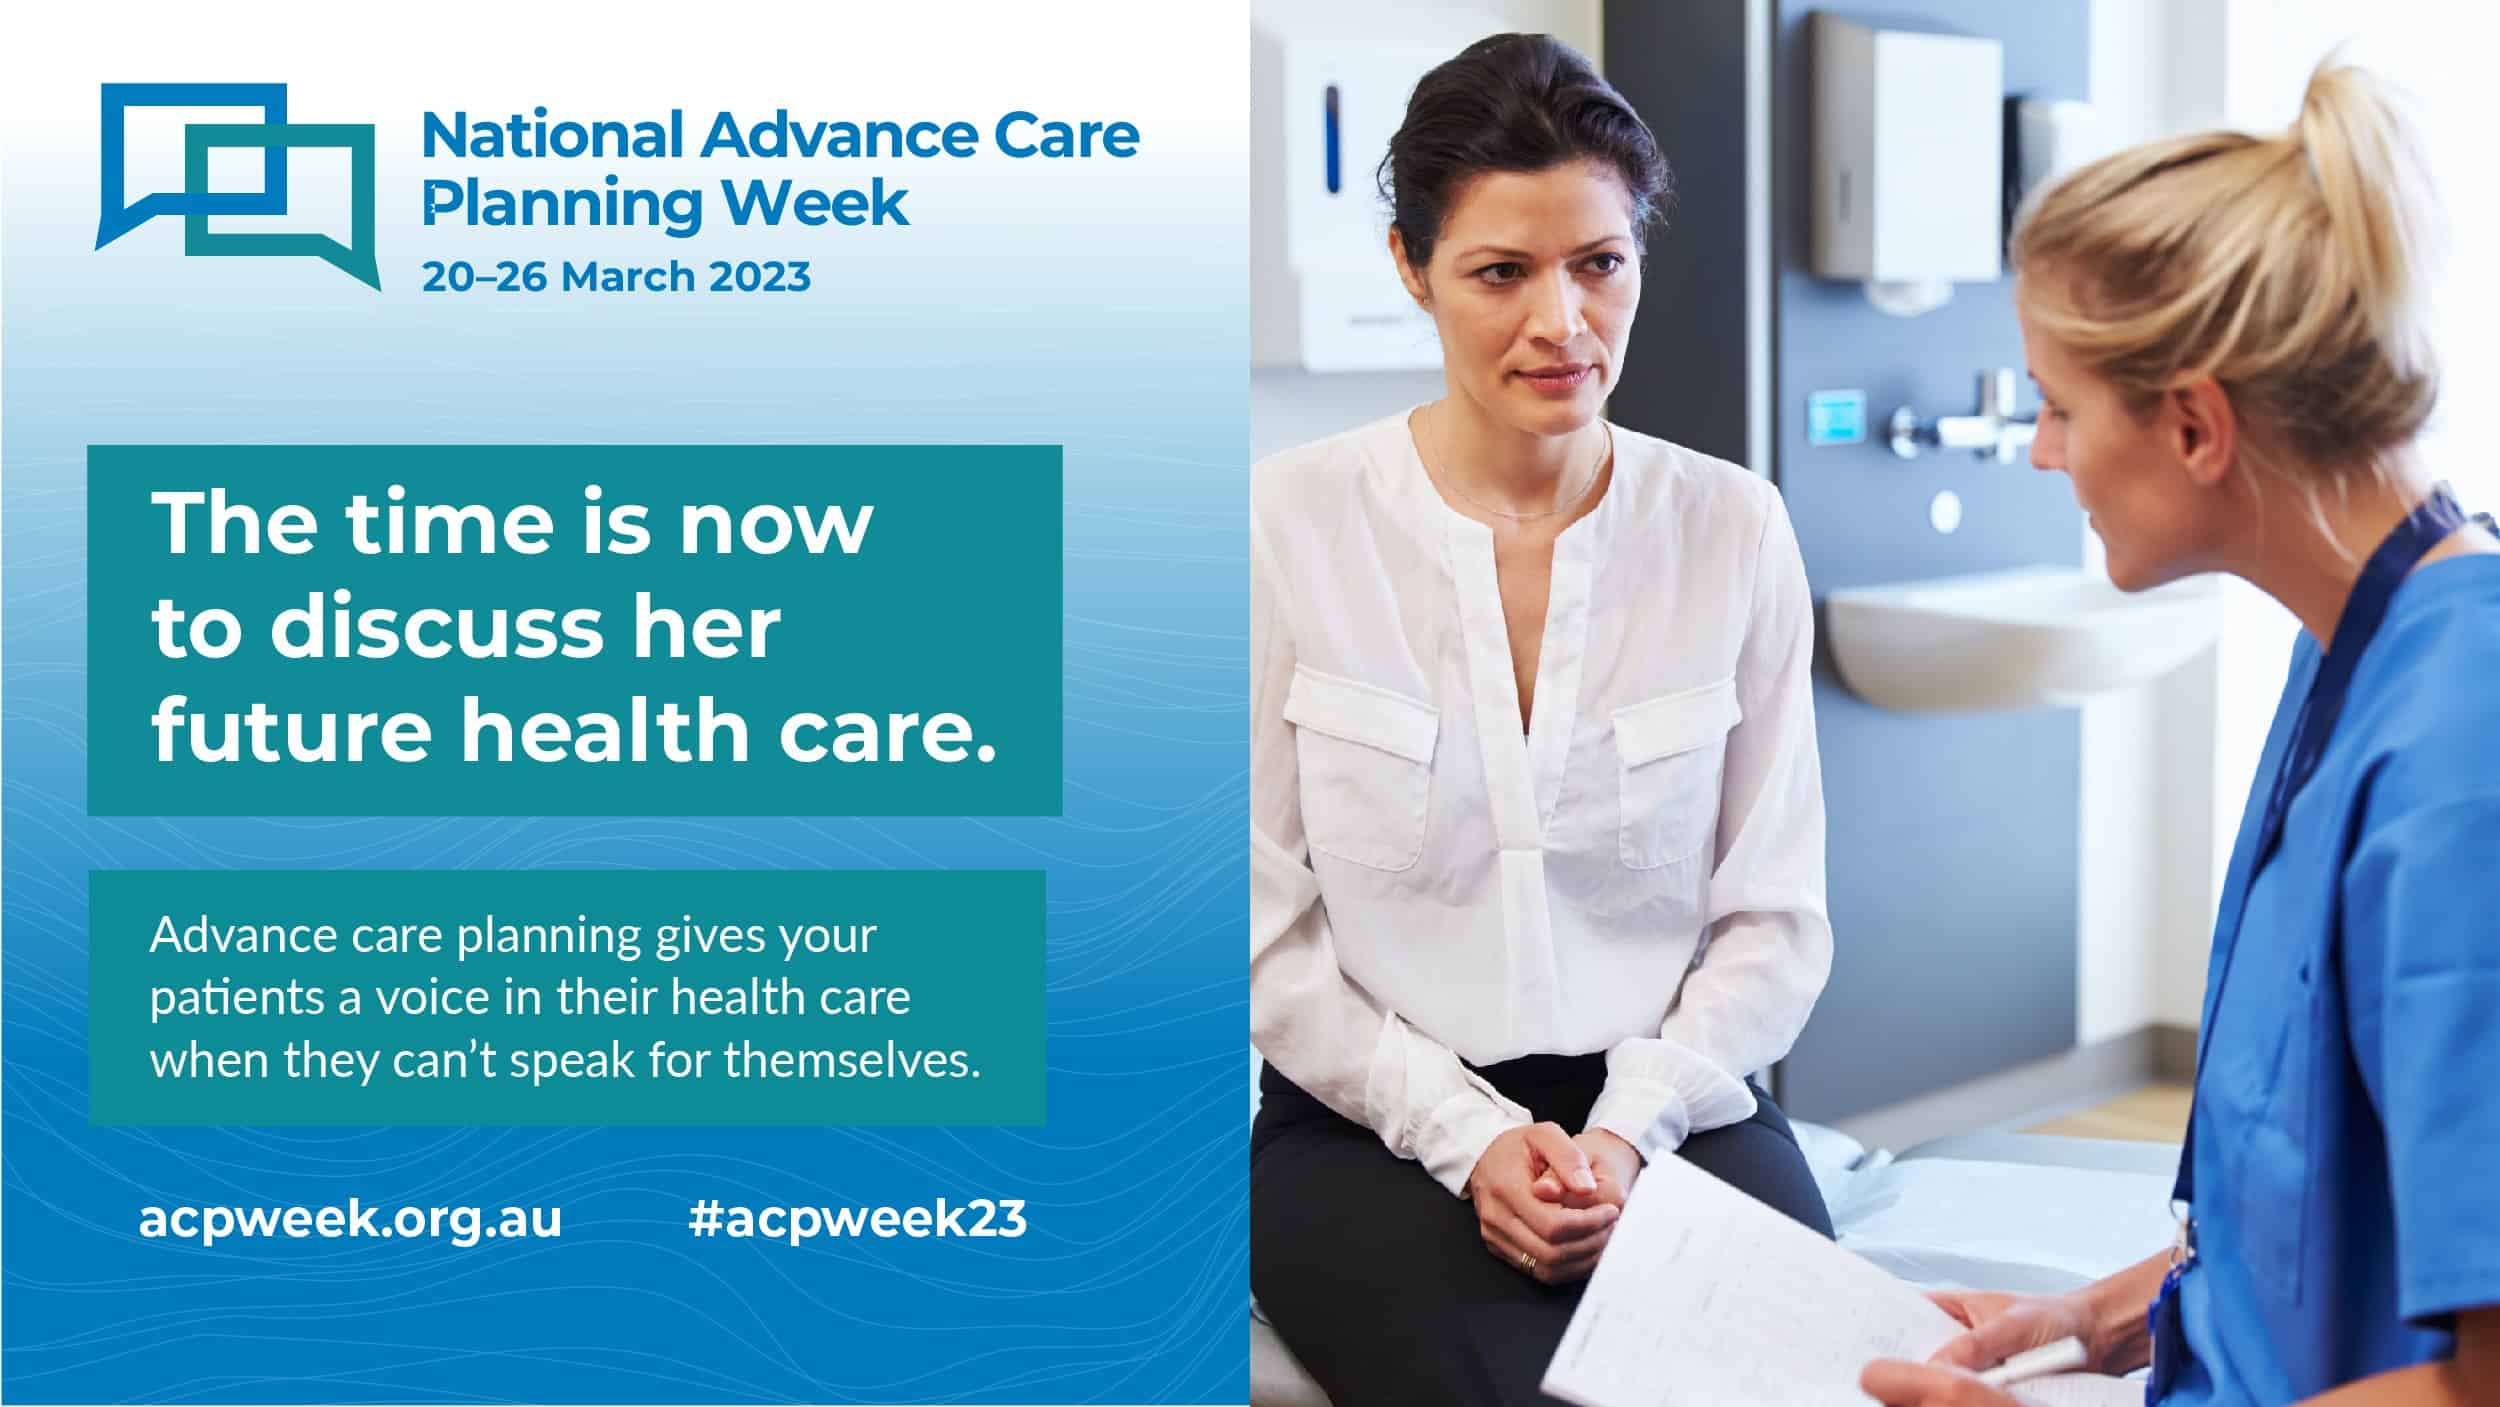 National Advance Care Planning Week health professional training: a panel discussion (webinar)